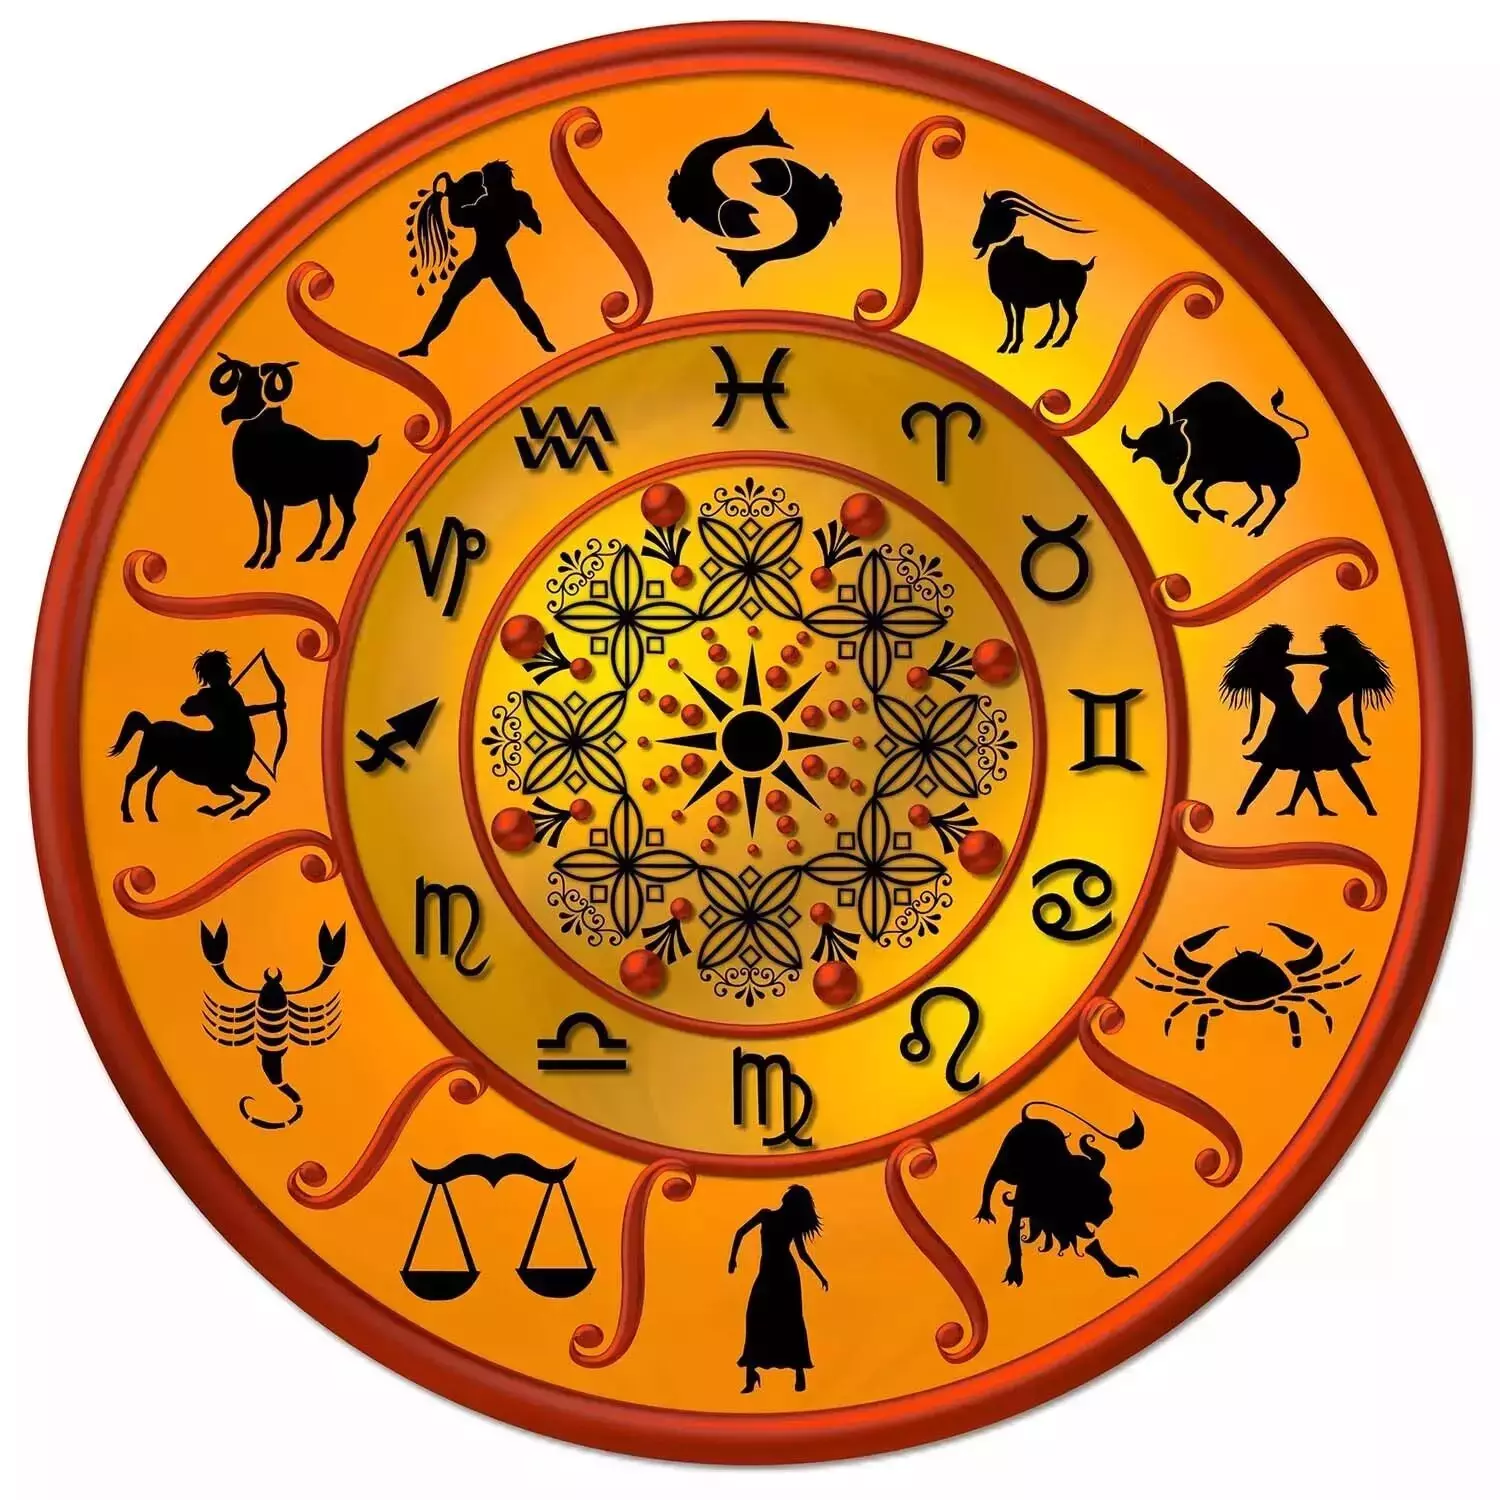 17 February – Know Your Todays Horoscope